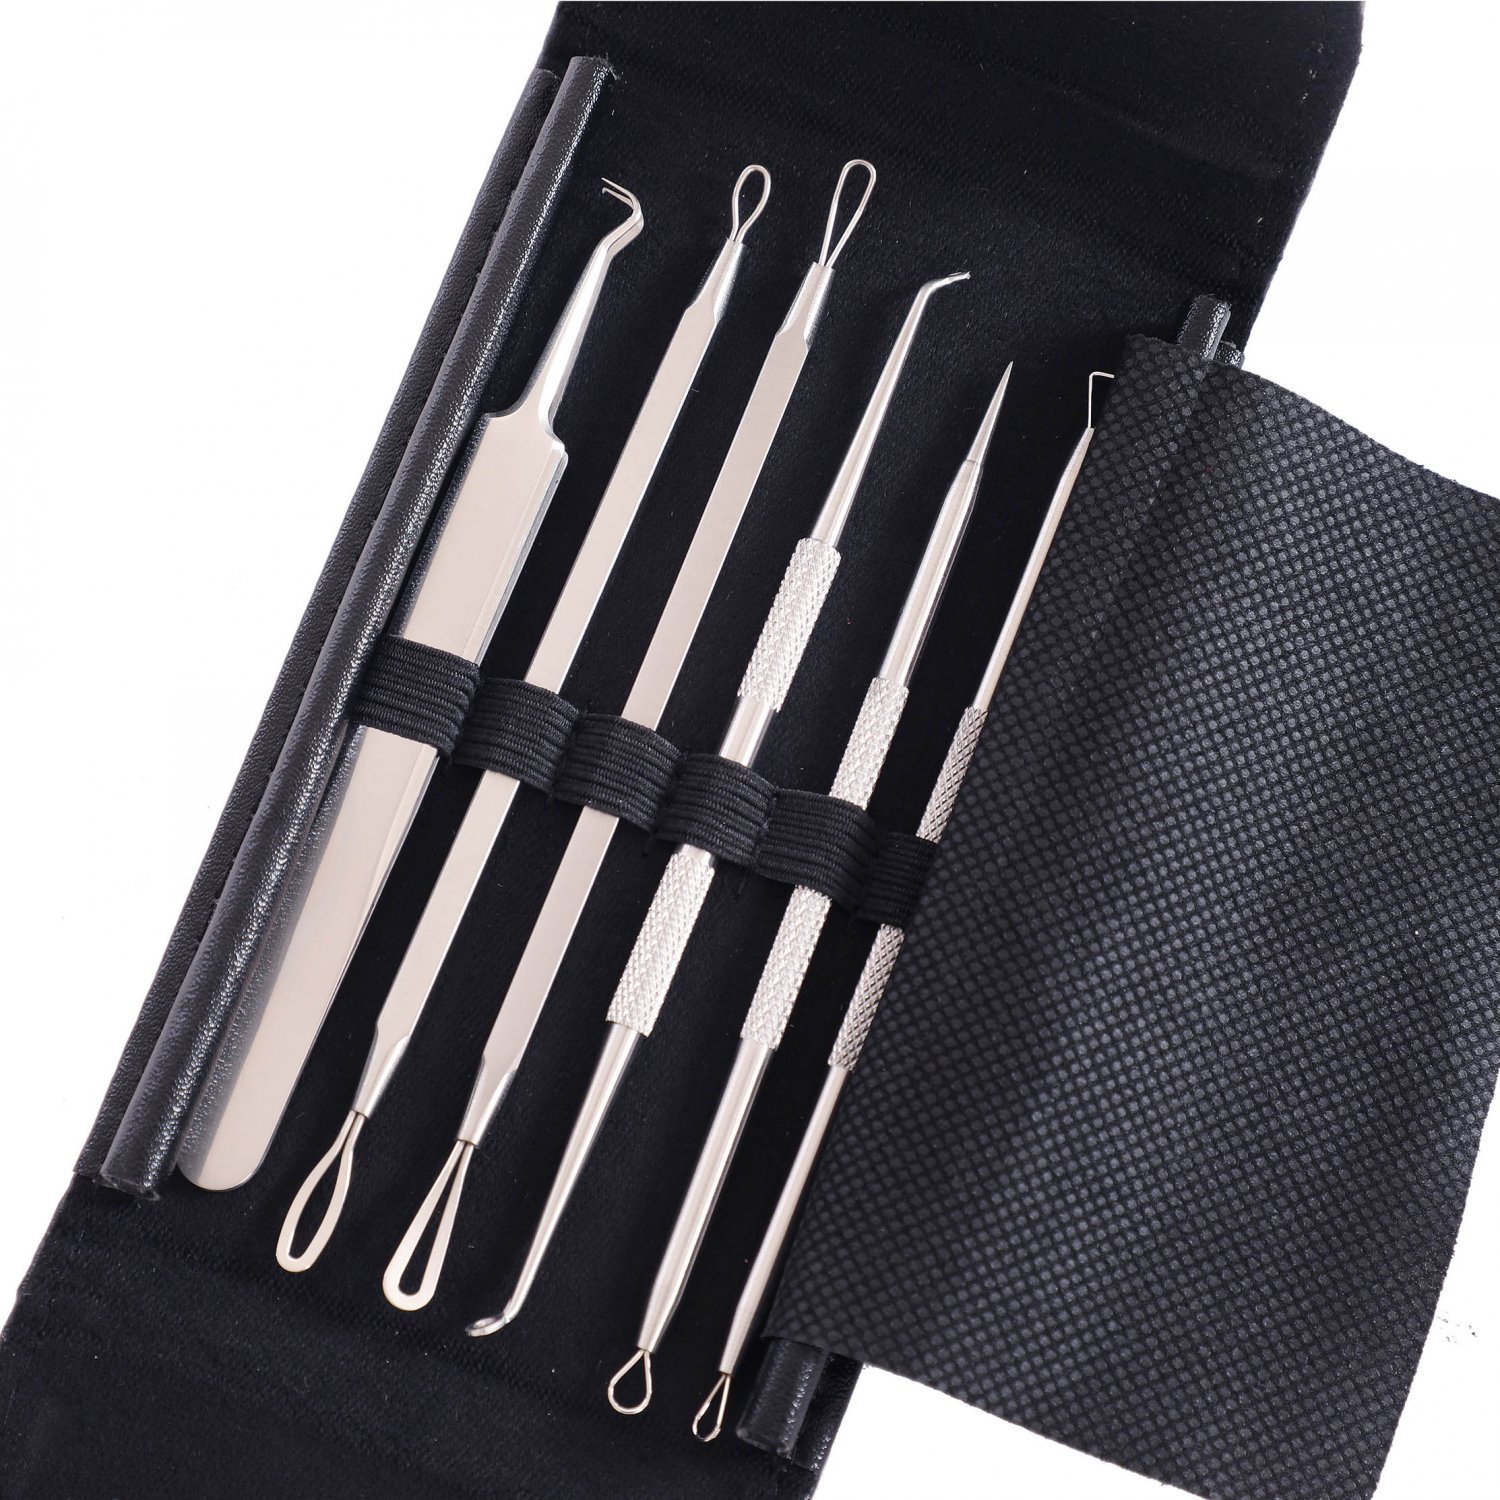 Stainless Steel Blackhead Pimple Acne Spot Remover Tool Set